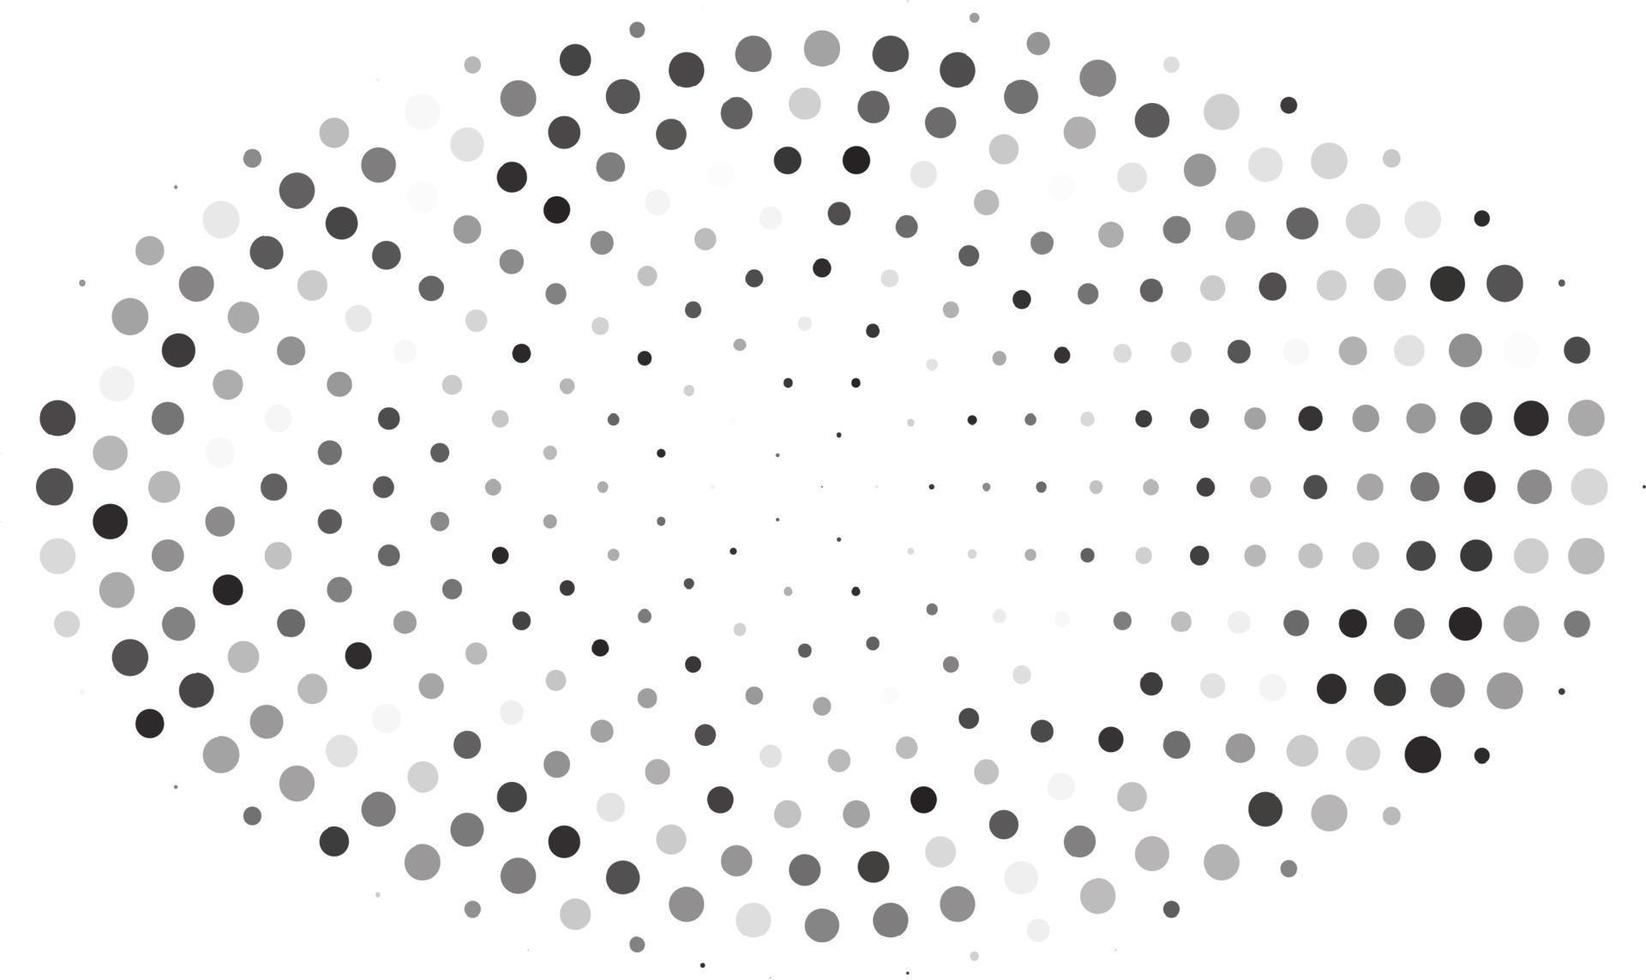 Retro halftone gradient from dots. Monochrome white and black halftone background with circles. Vector illustration